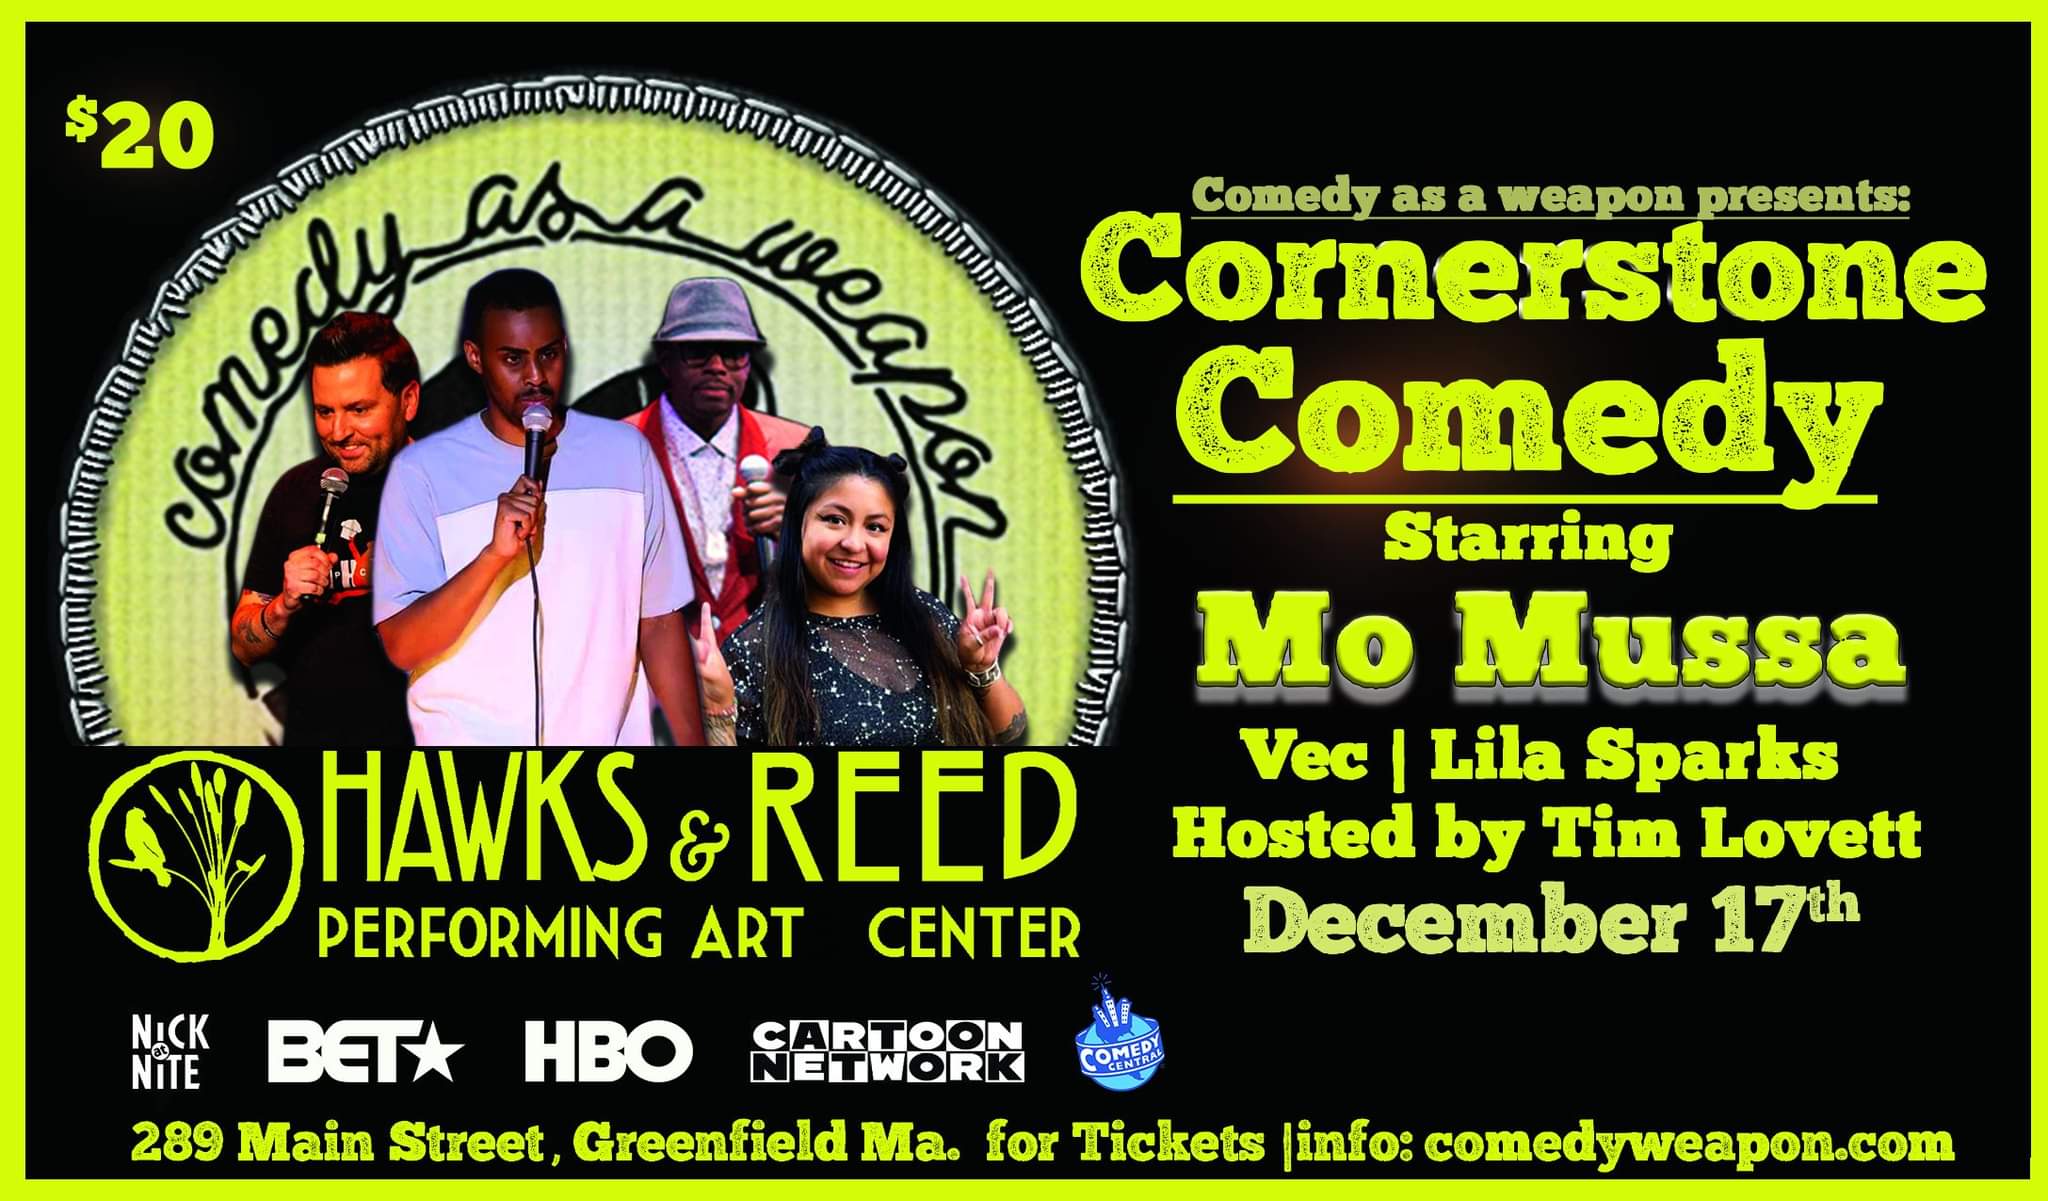 Cornerstone Comedy Ft. MO MUSSA at Hawks and Reed